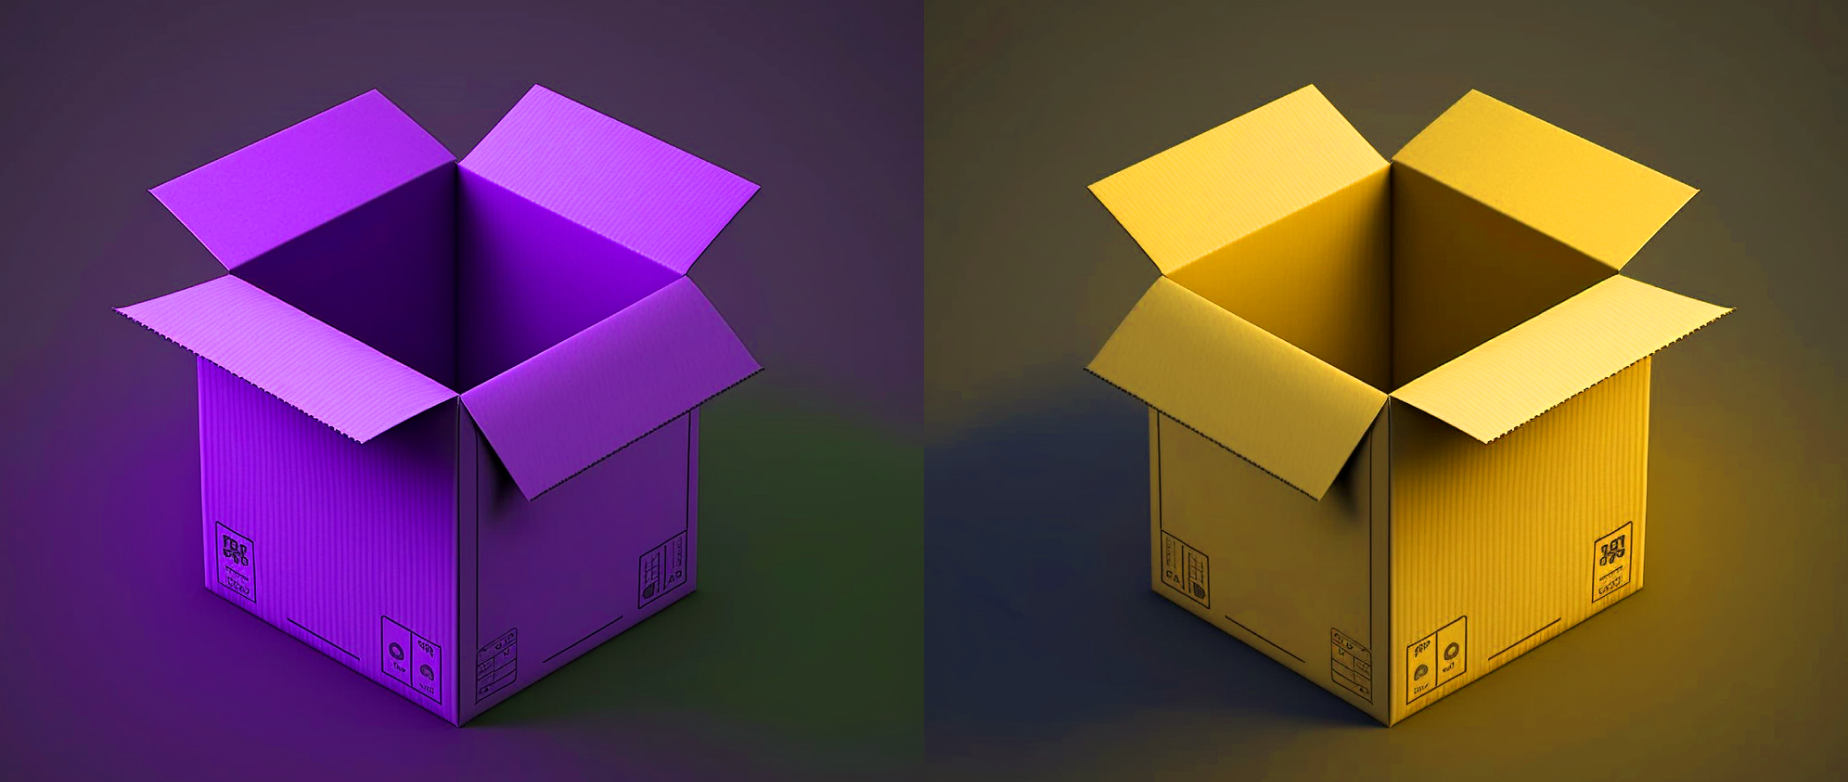 A graphic of two shipping boxes, one purple and one yellow, side by side